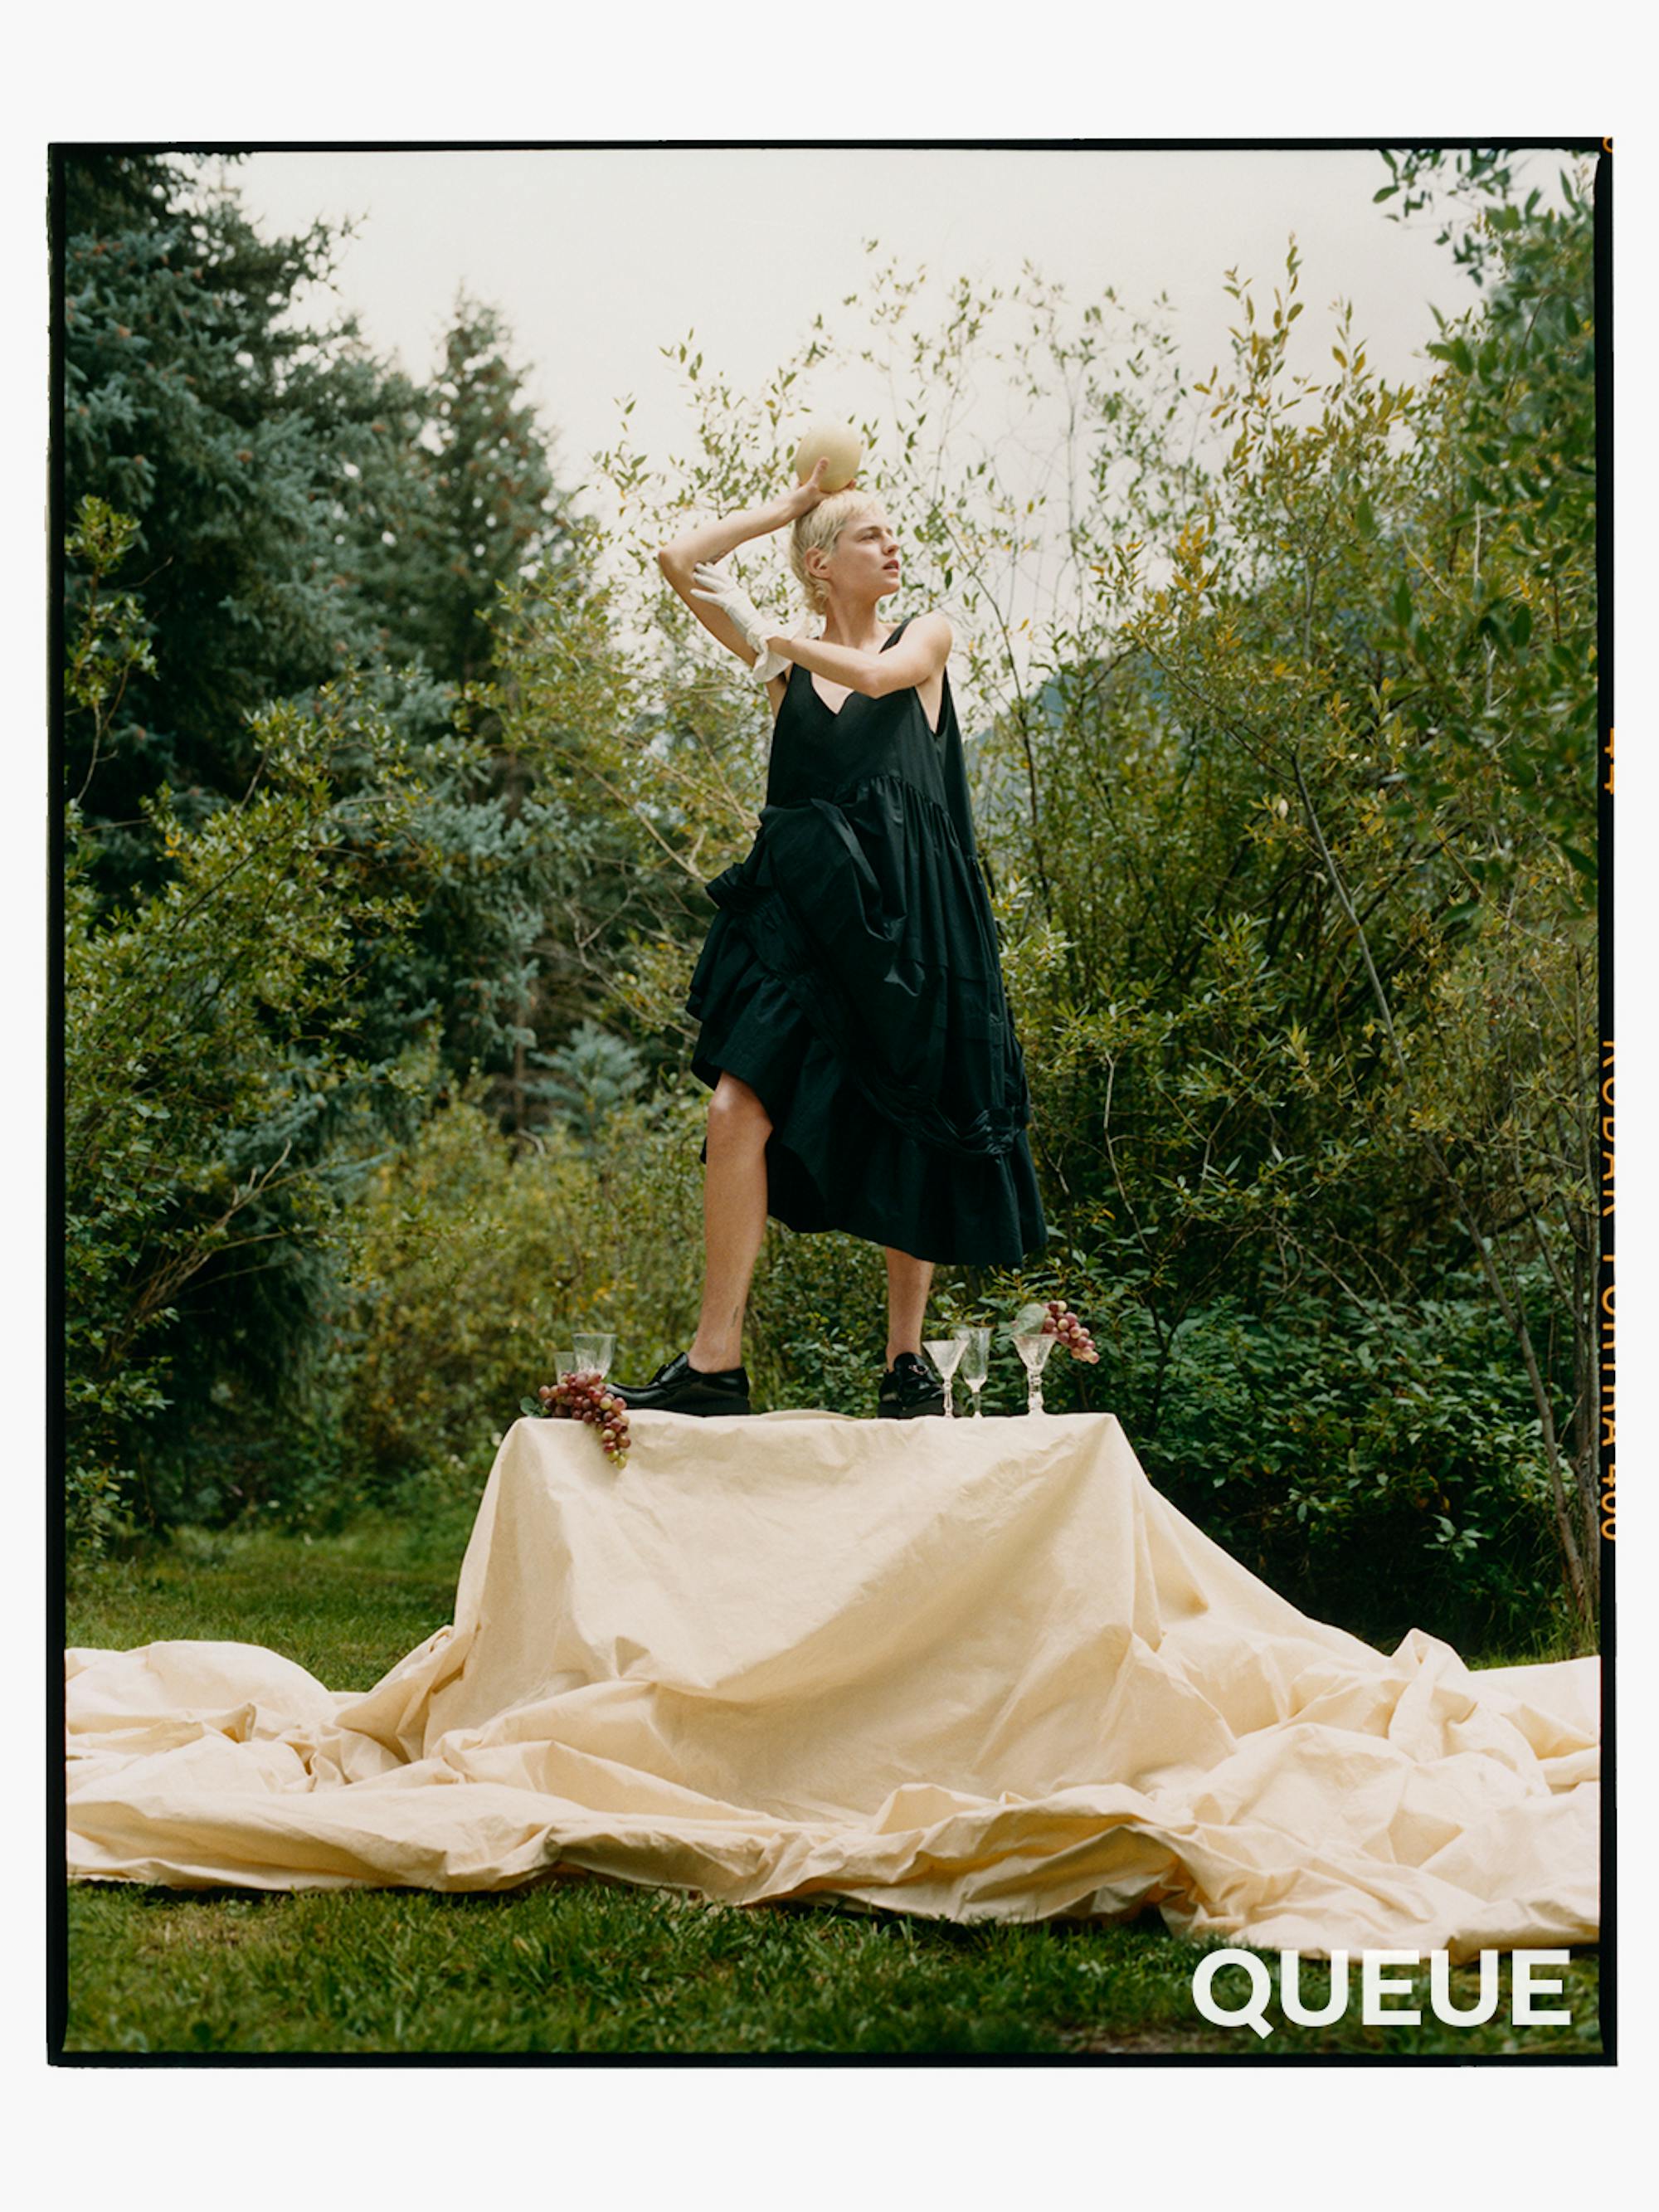 Emma Corrin wears a black dress and stands on a raised platform in the woods. 